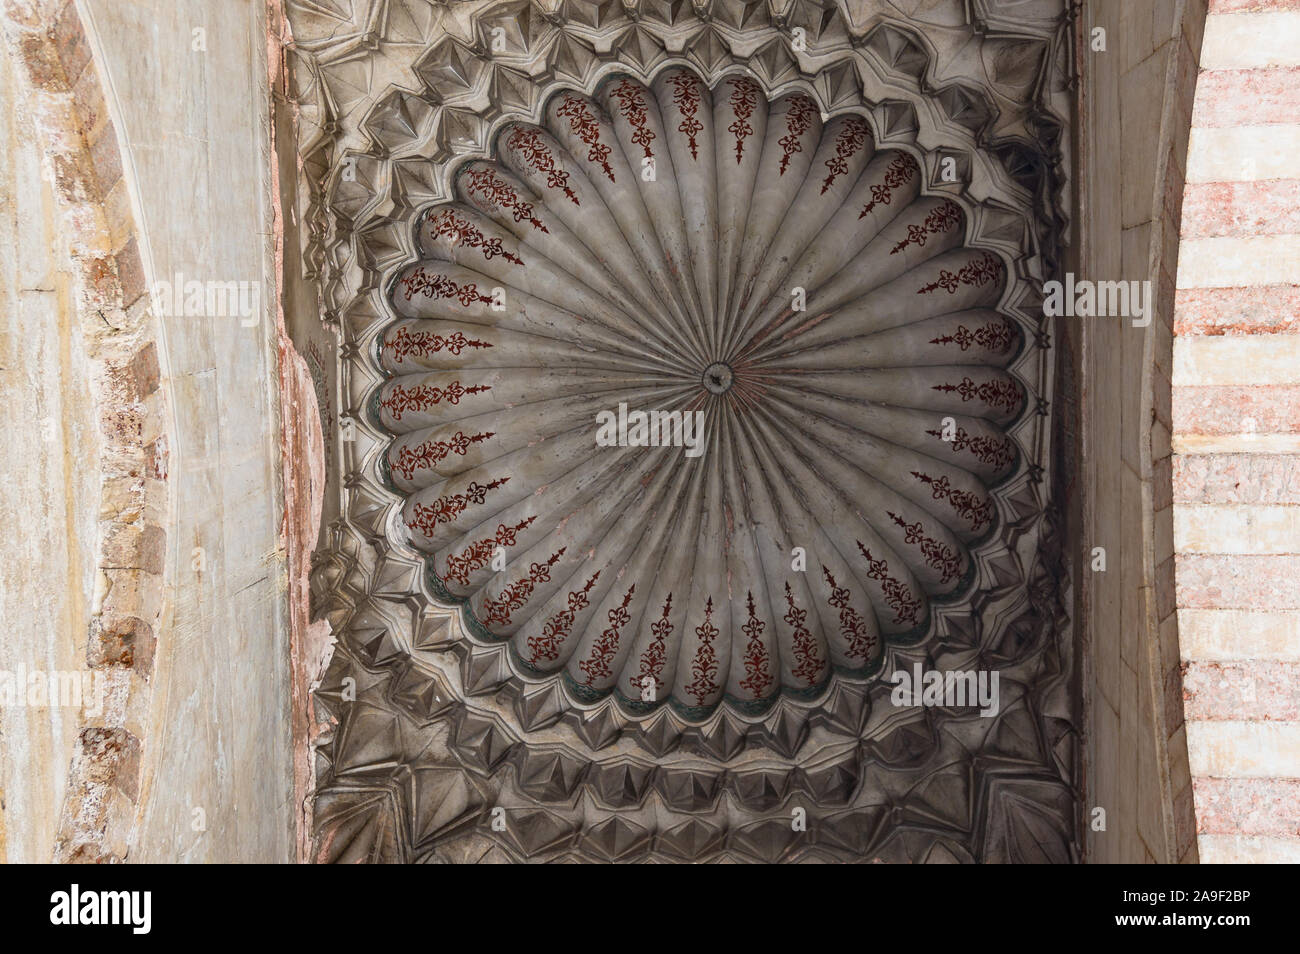 Istanbul, Turkey - August 27, 2013: Ceiling, vaulting of Yeni Cami Stock Photo